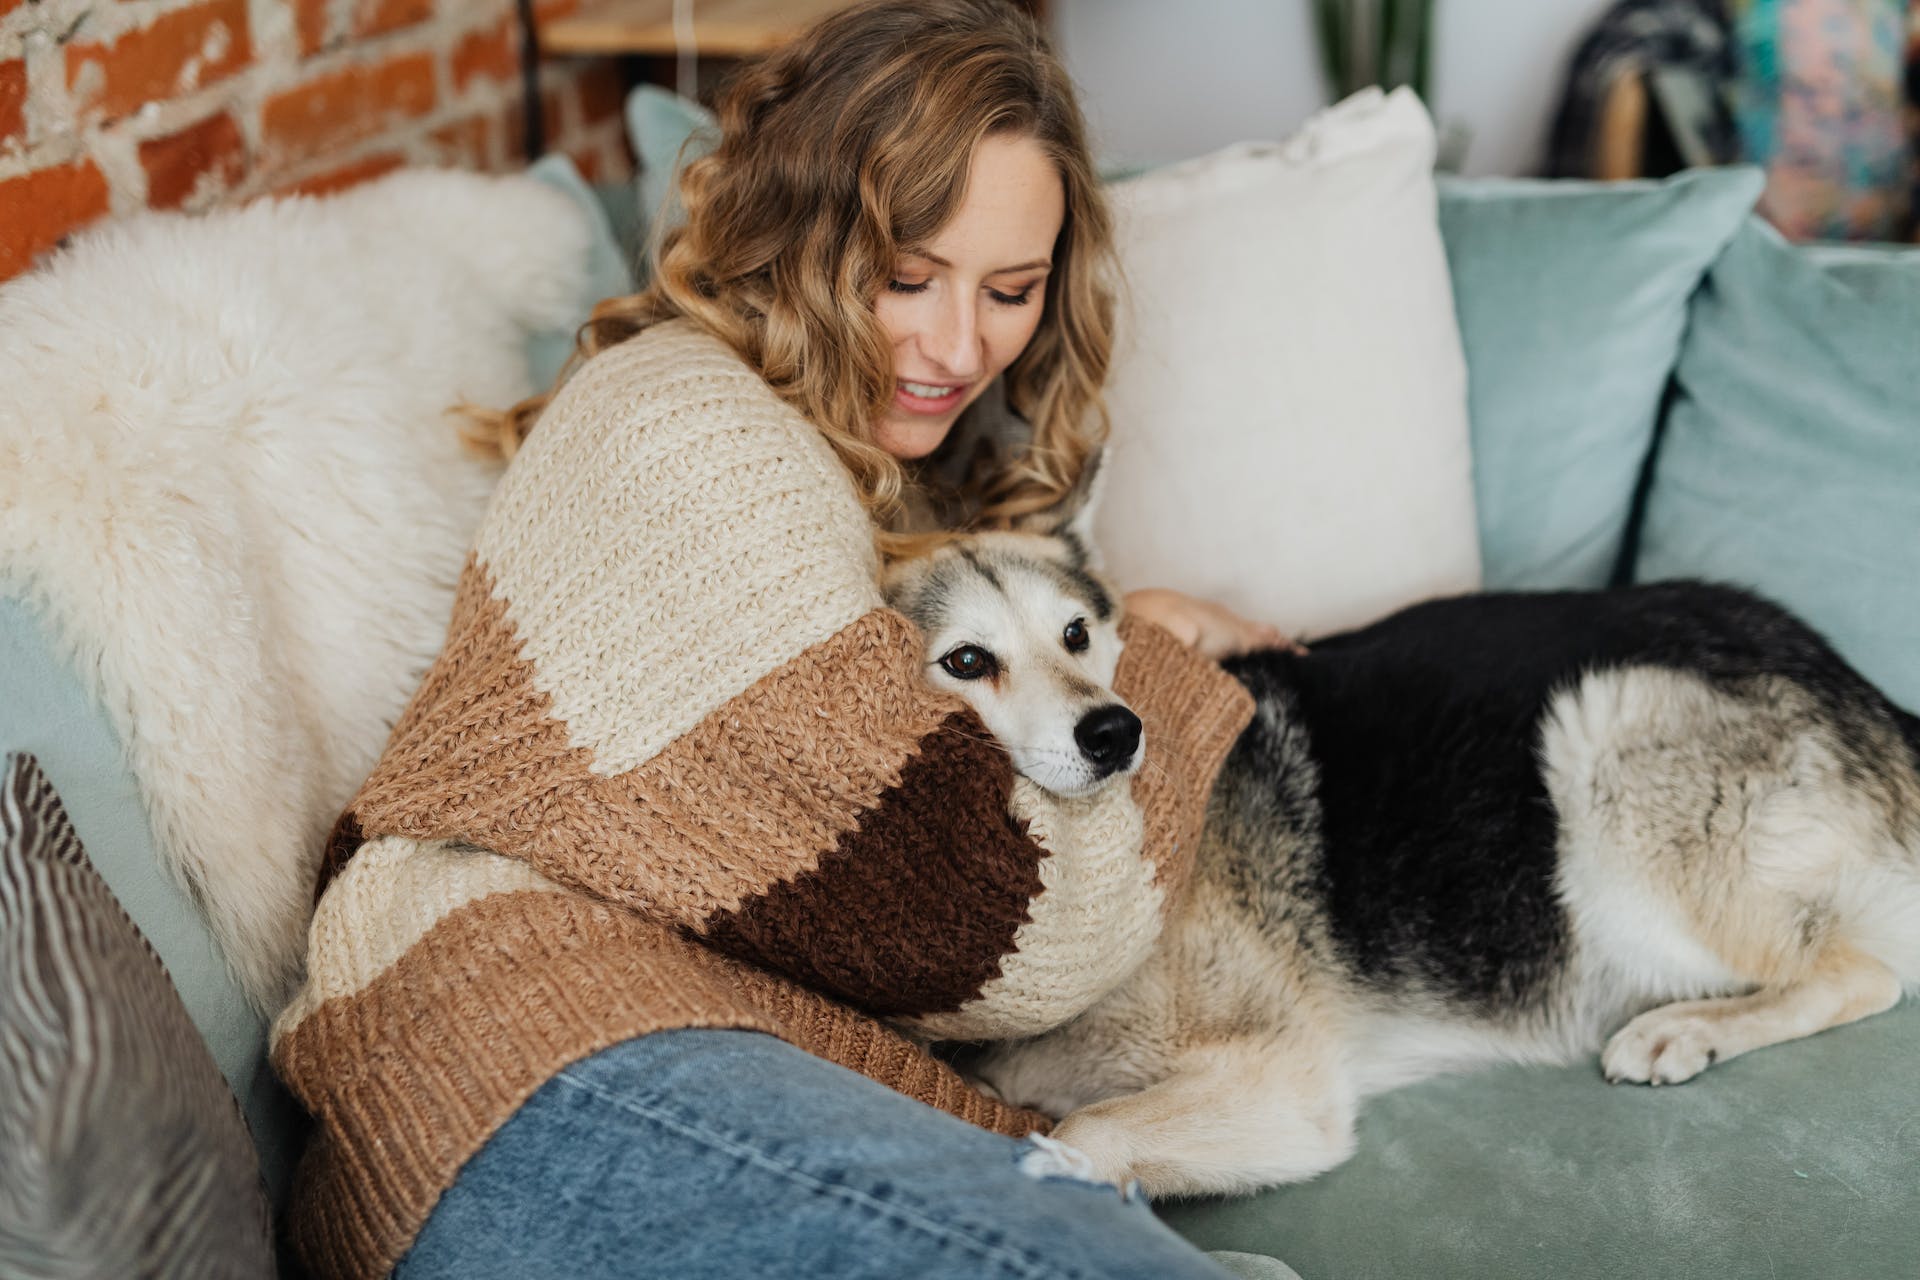 A woman hugging a dog on a couch